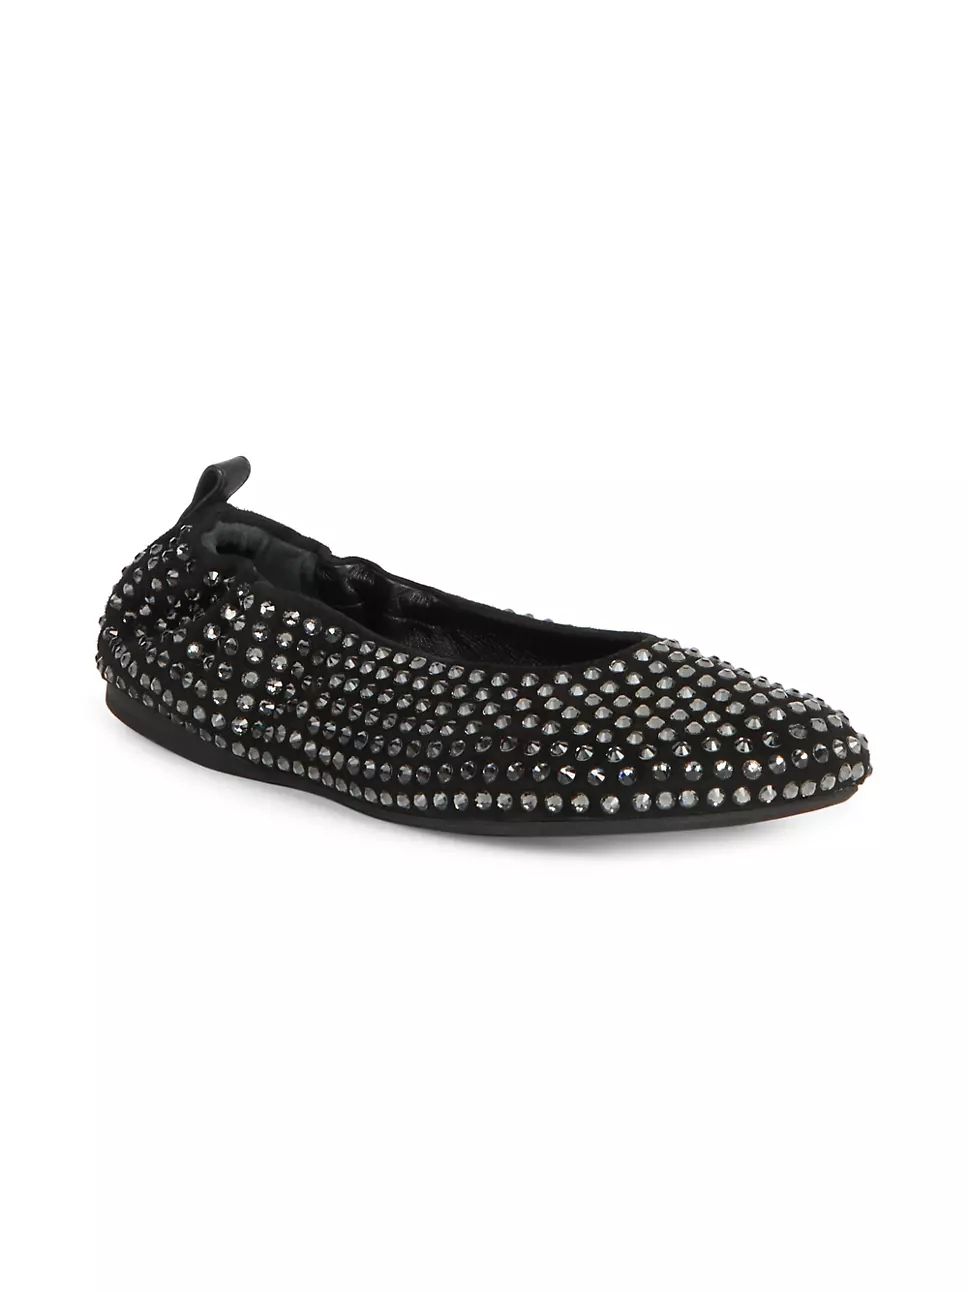 Leather & Crystal Ballet Flats | Saks Fifth Avenue